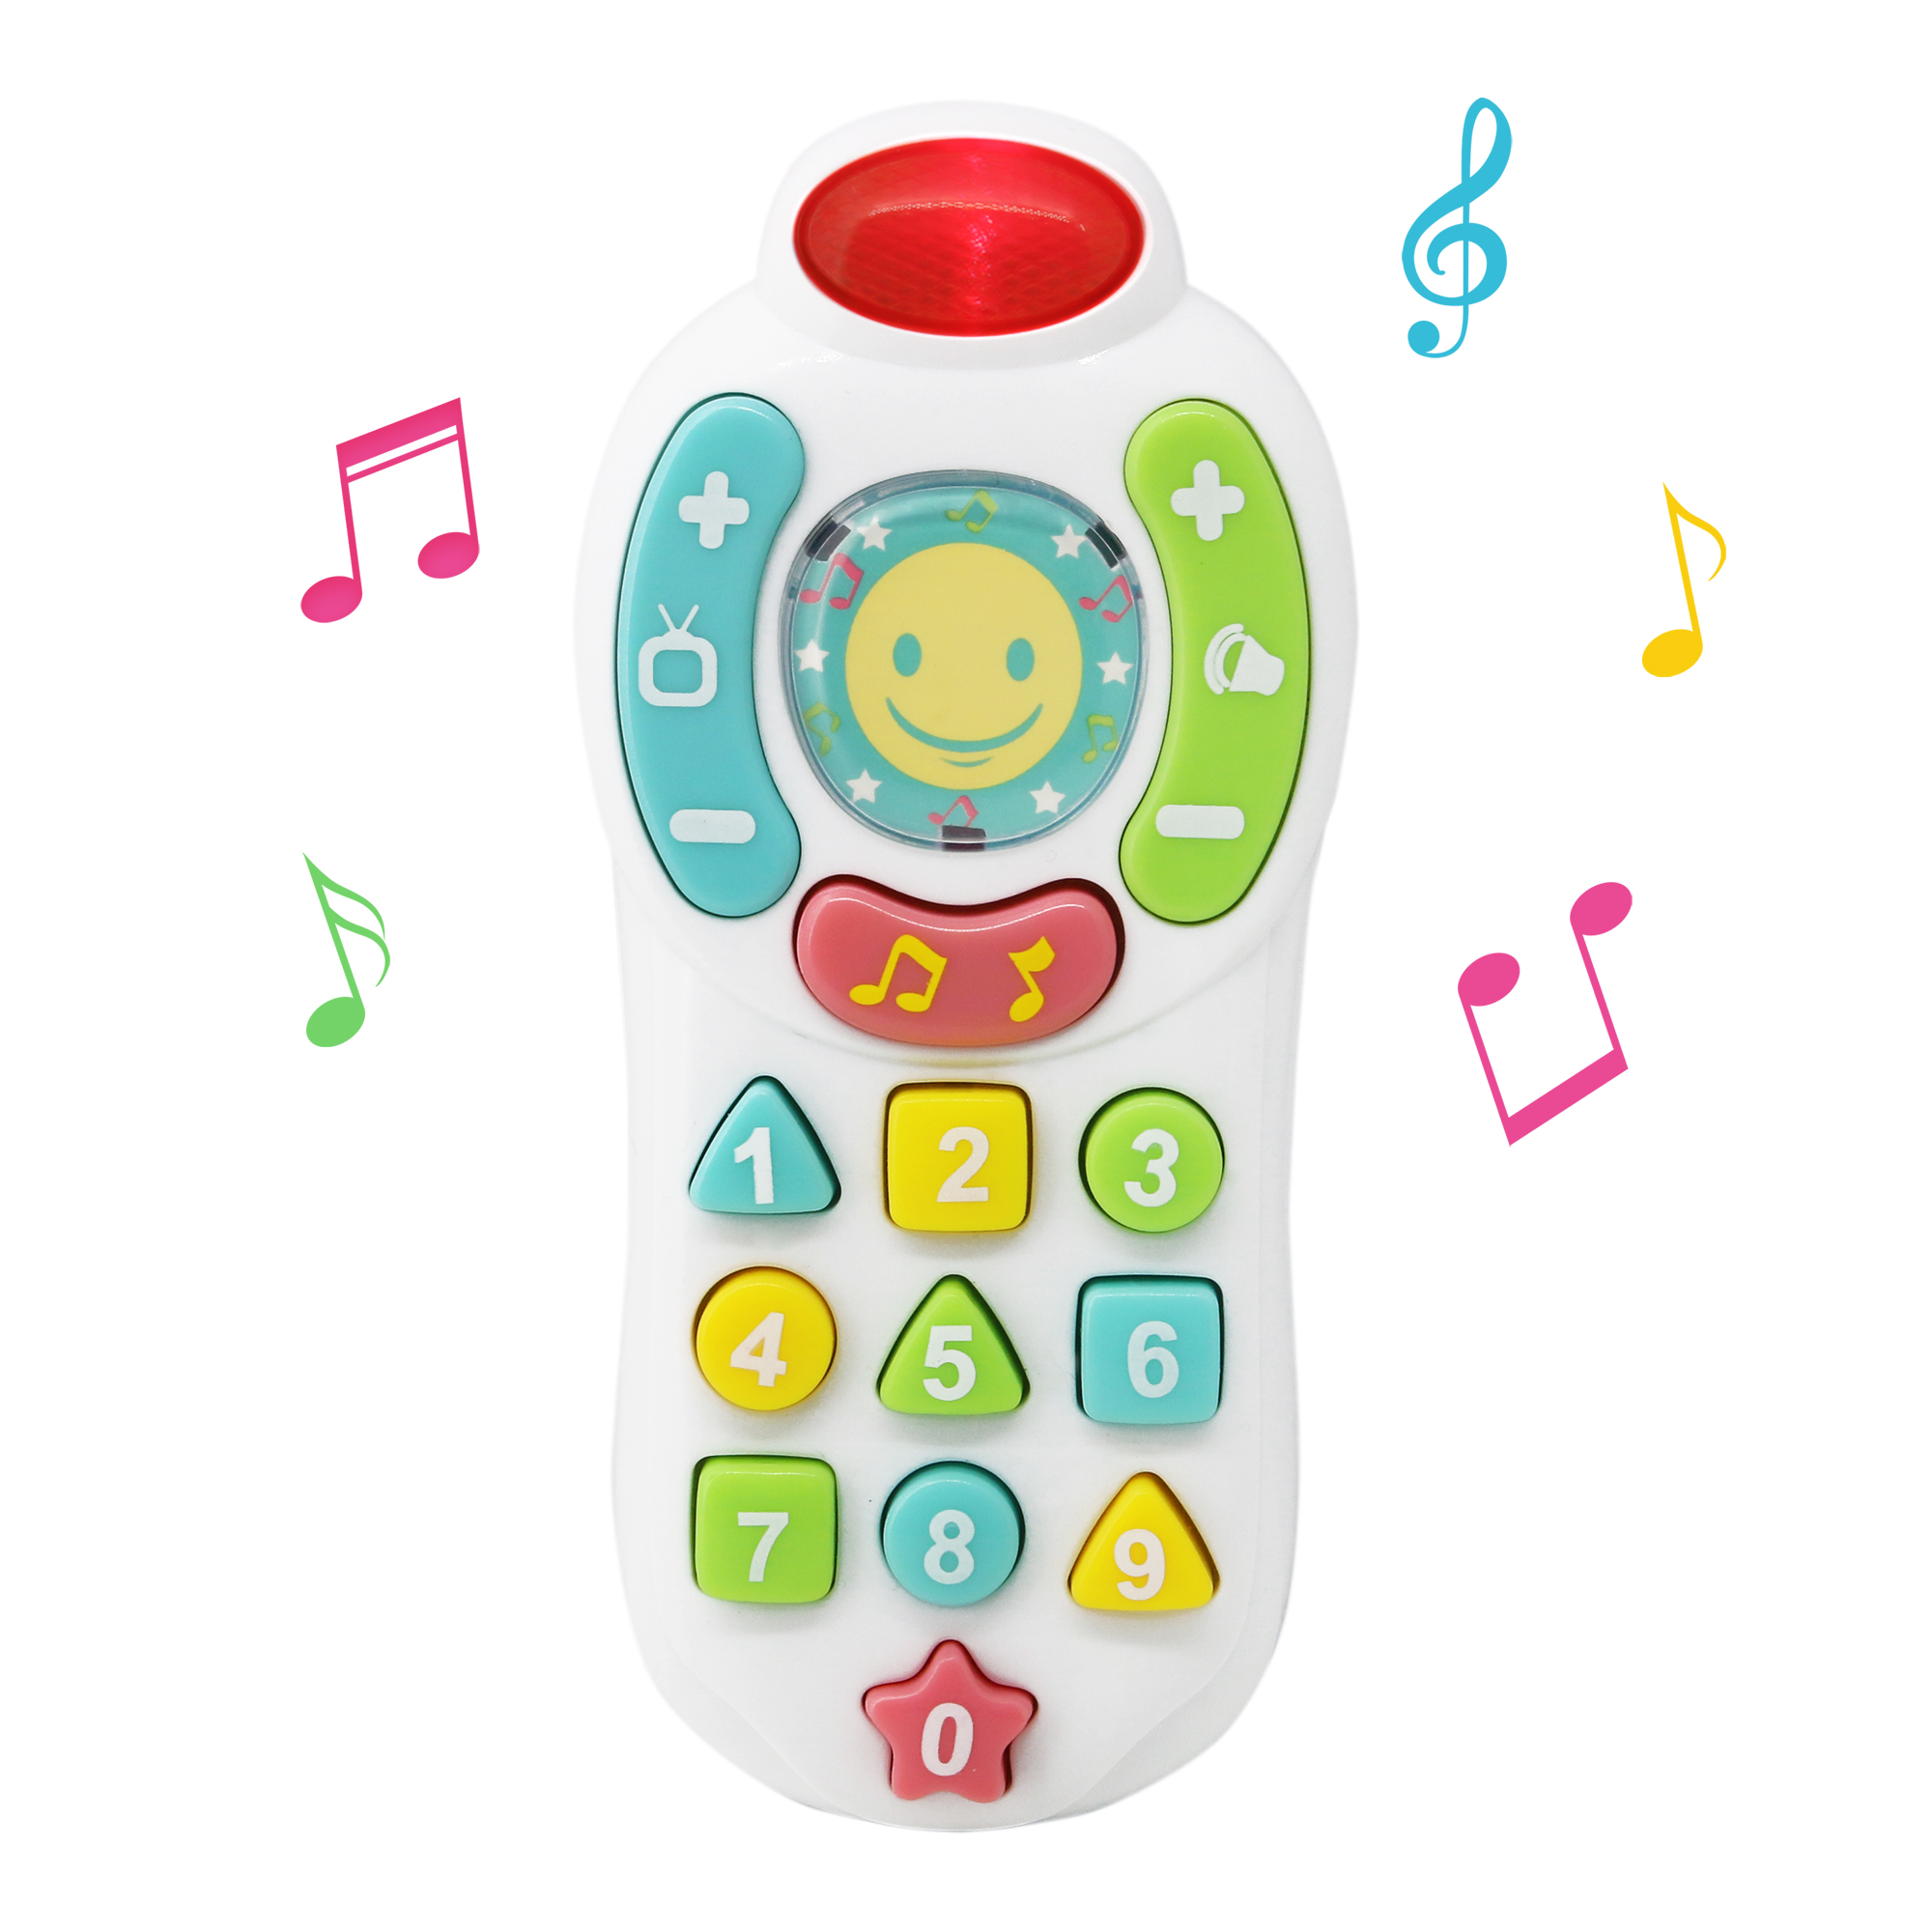 Spark Create Imagine Electronic Learning Remote Toddler Toy - image 3 of 10